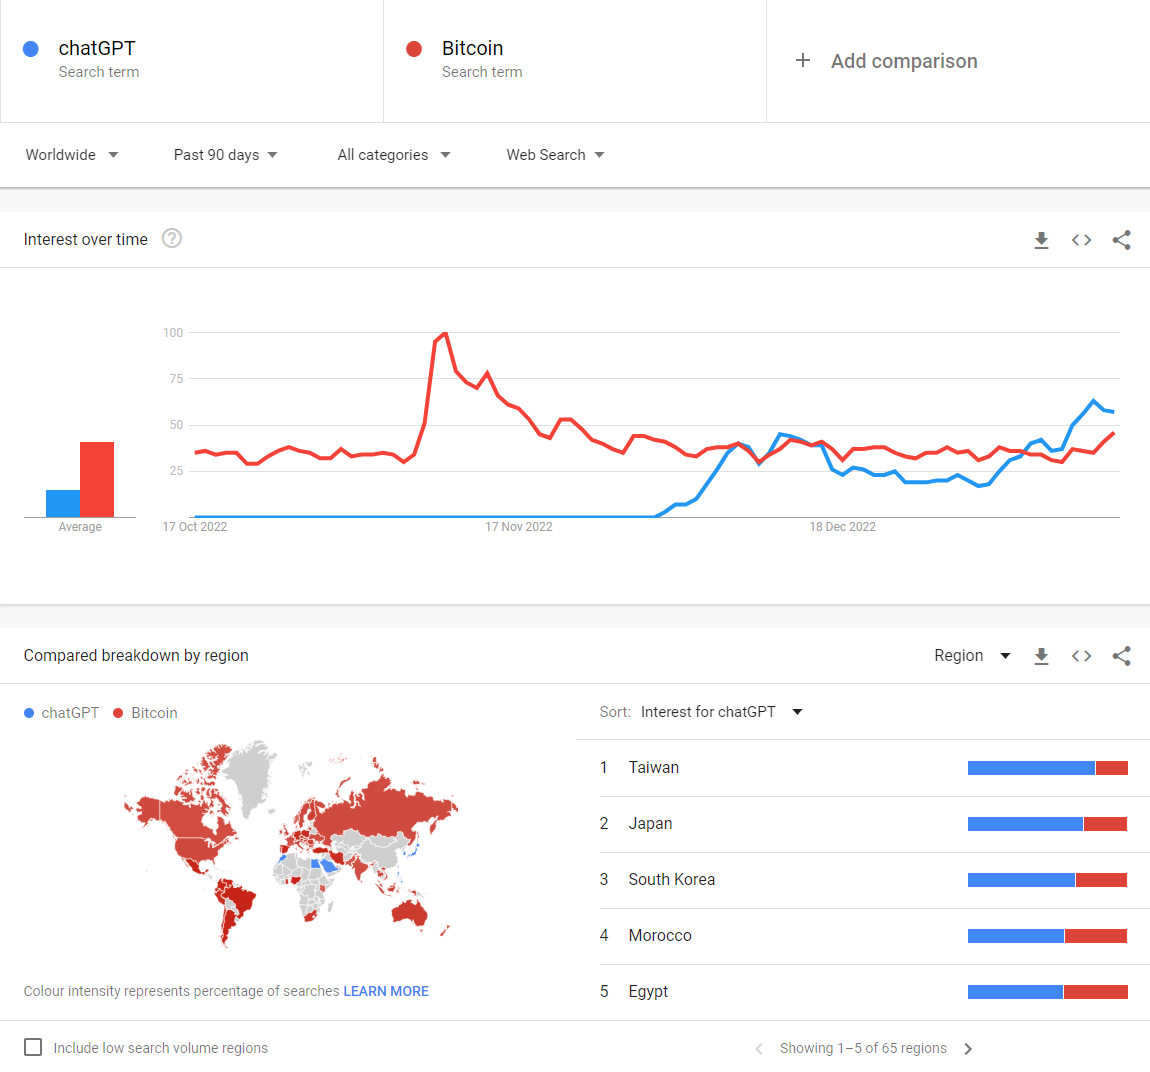 Google Search Trends for “chatGPT” and “Bitcoin.” 